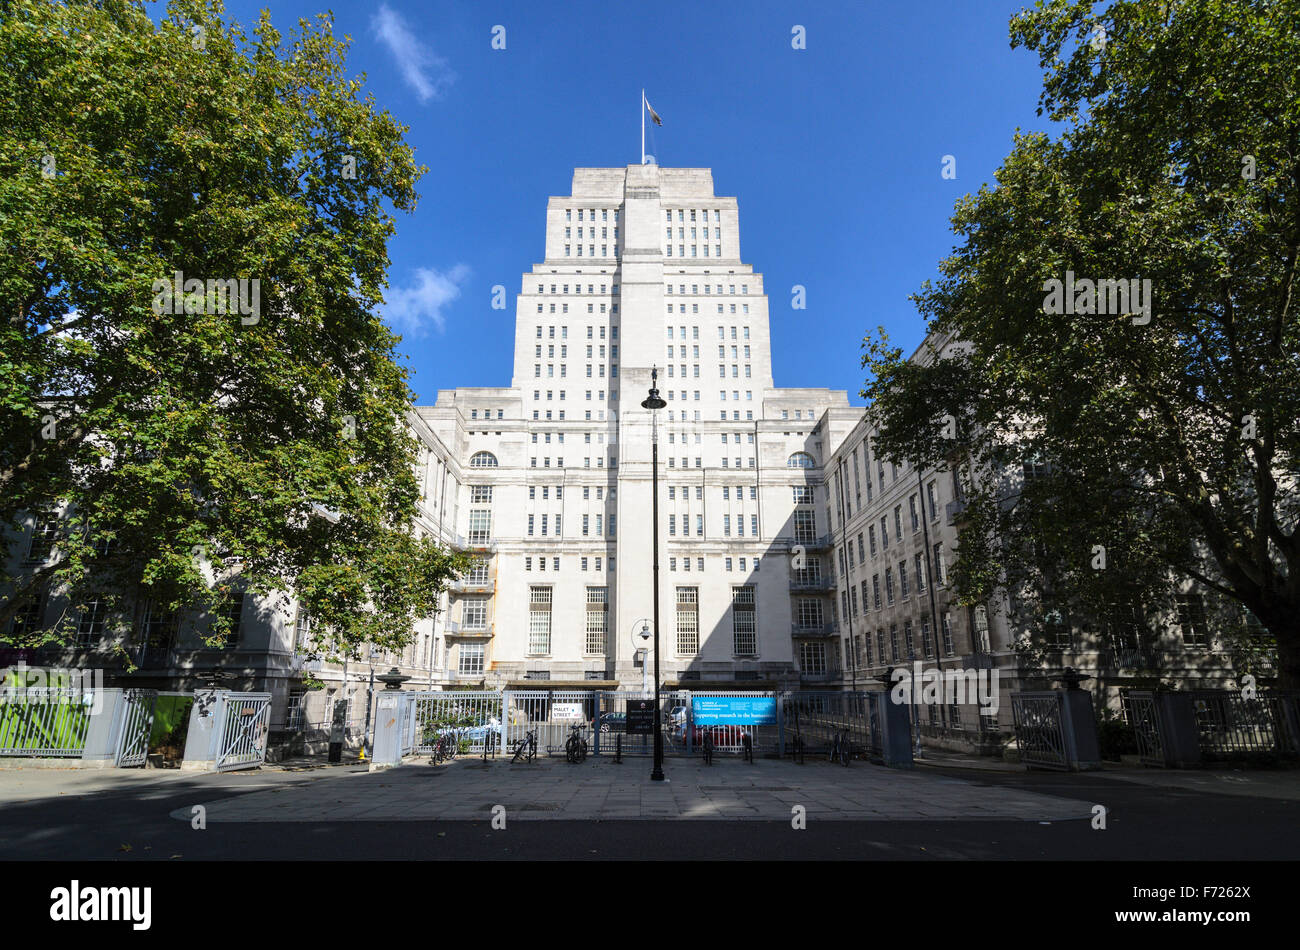 Senate House is the central building for the University of London, Bloomsbury, London, England, United Kingdom. Stock Photo